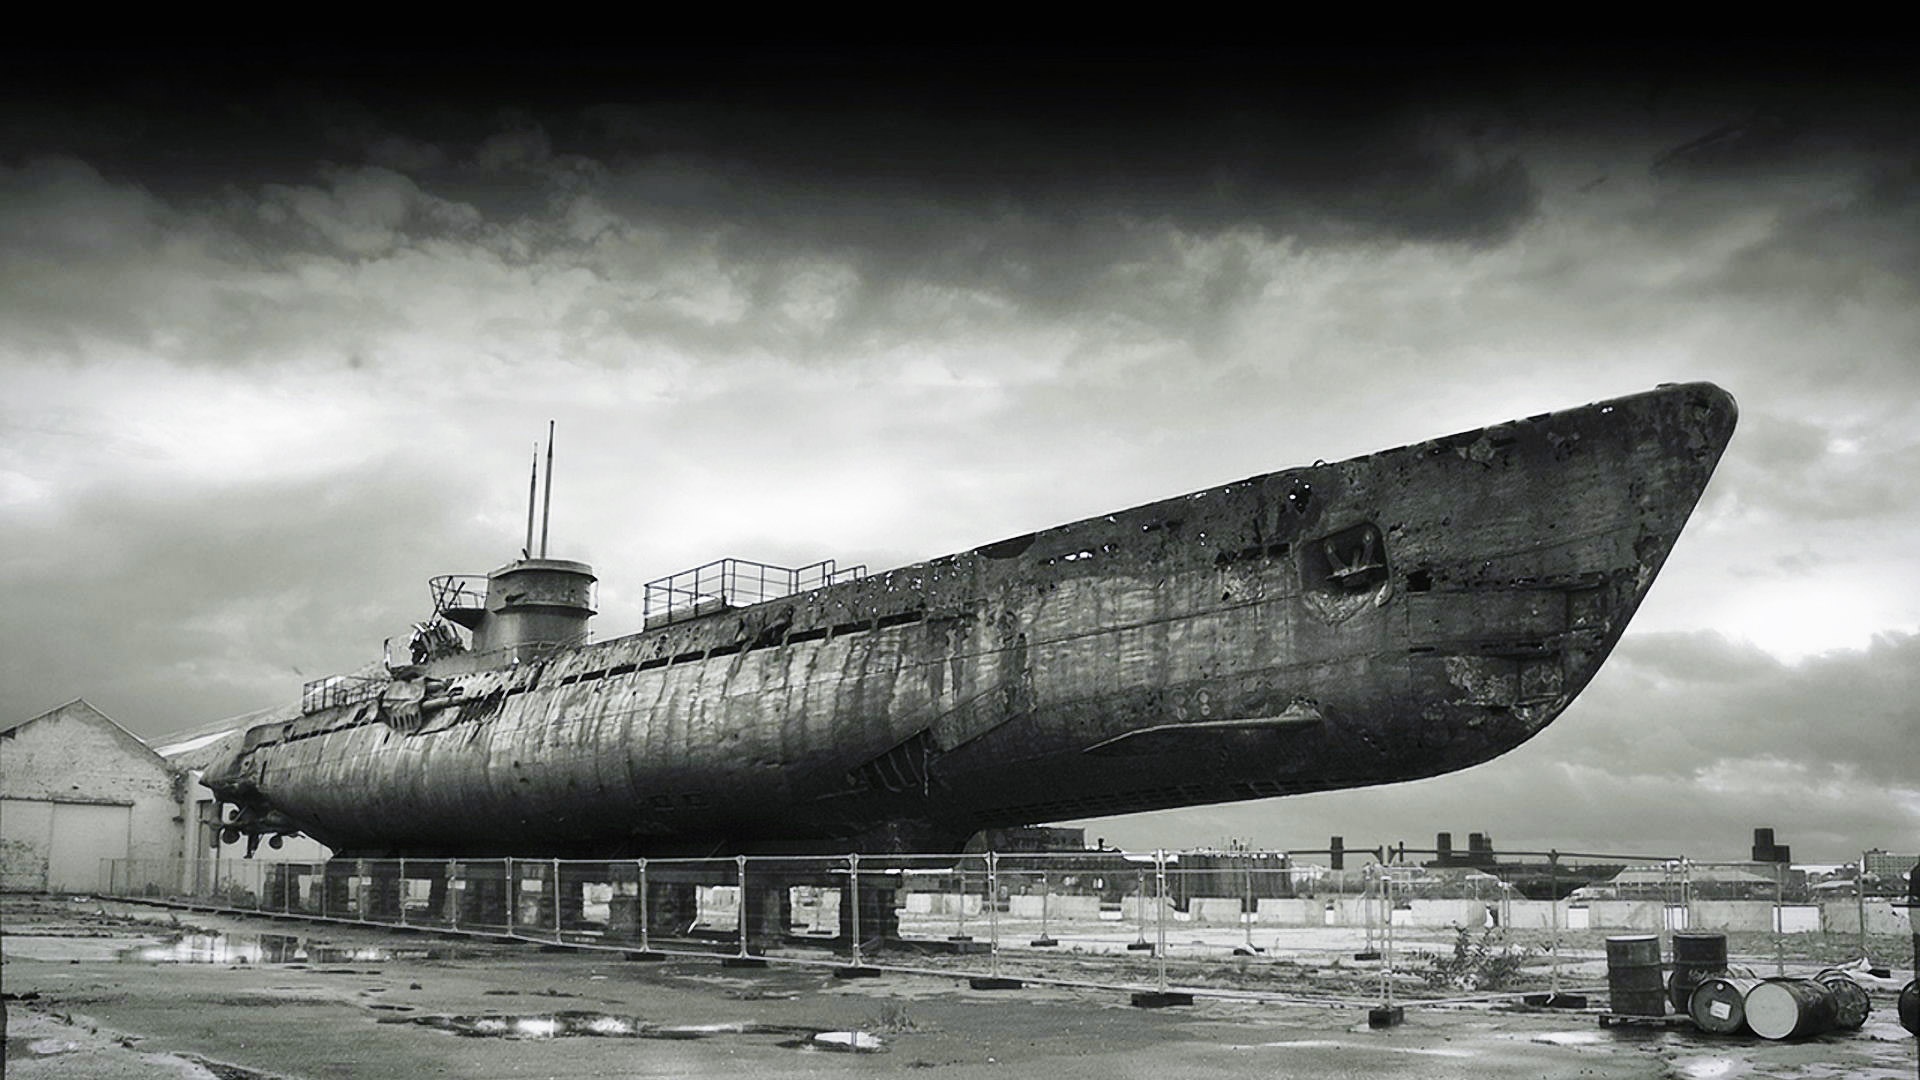 Abandoned Submarines   HD Wallpapers Widescreen   1920x1080 1920x1080